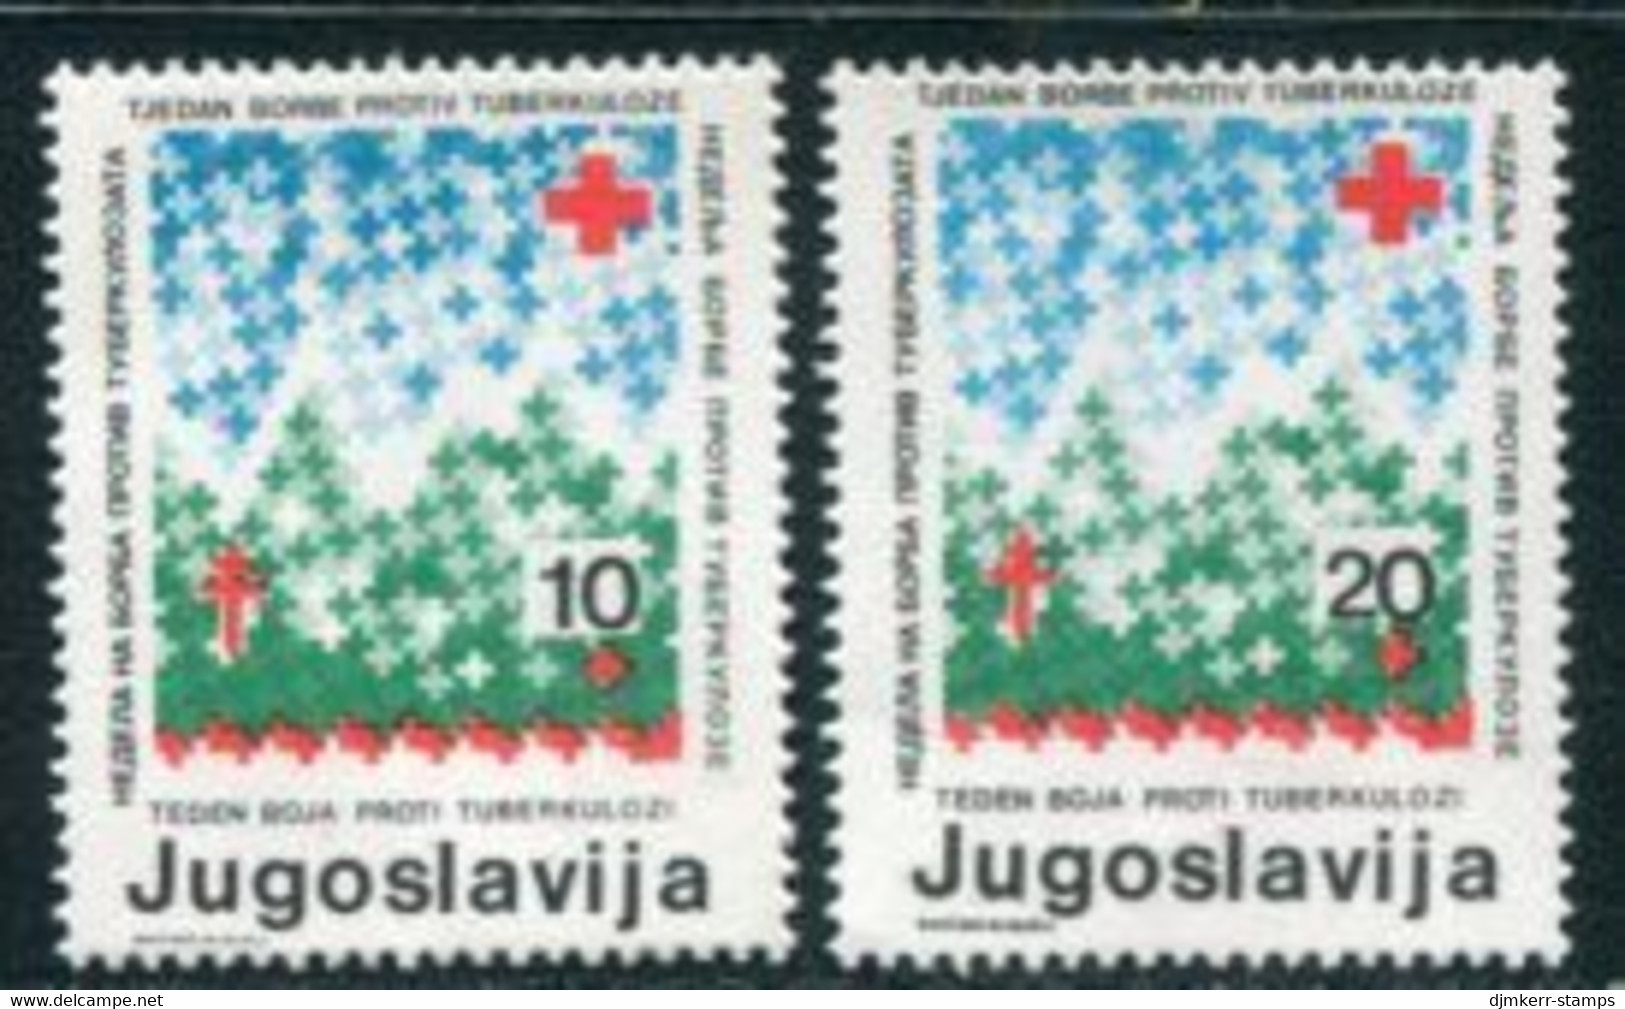 YUGOSLAVIA 1986 Red Cross Anti-Tuberculosis Tax 10, 20 D. Perforated 13¼:13½ MNH / **. Michel ZZM 119C, 122C - Beneficenza